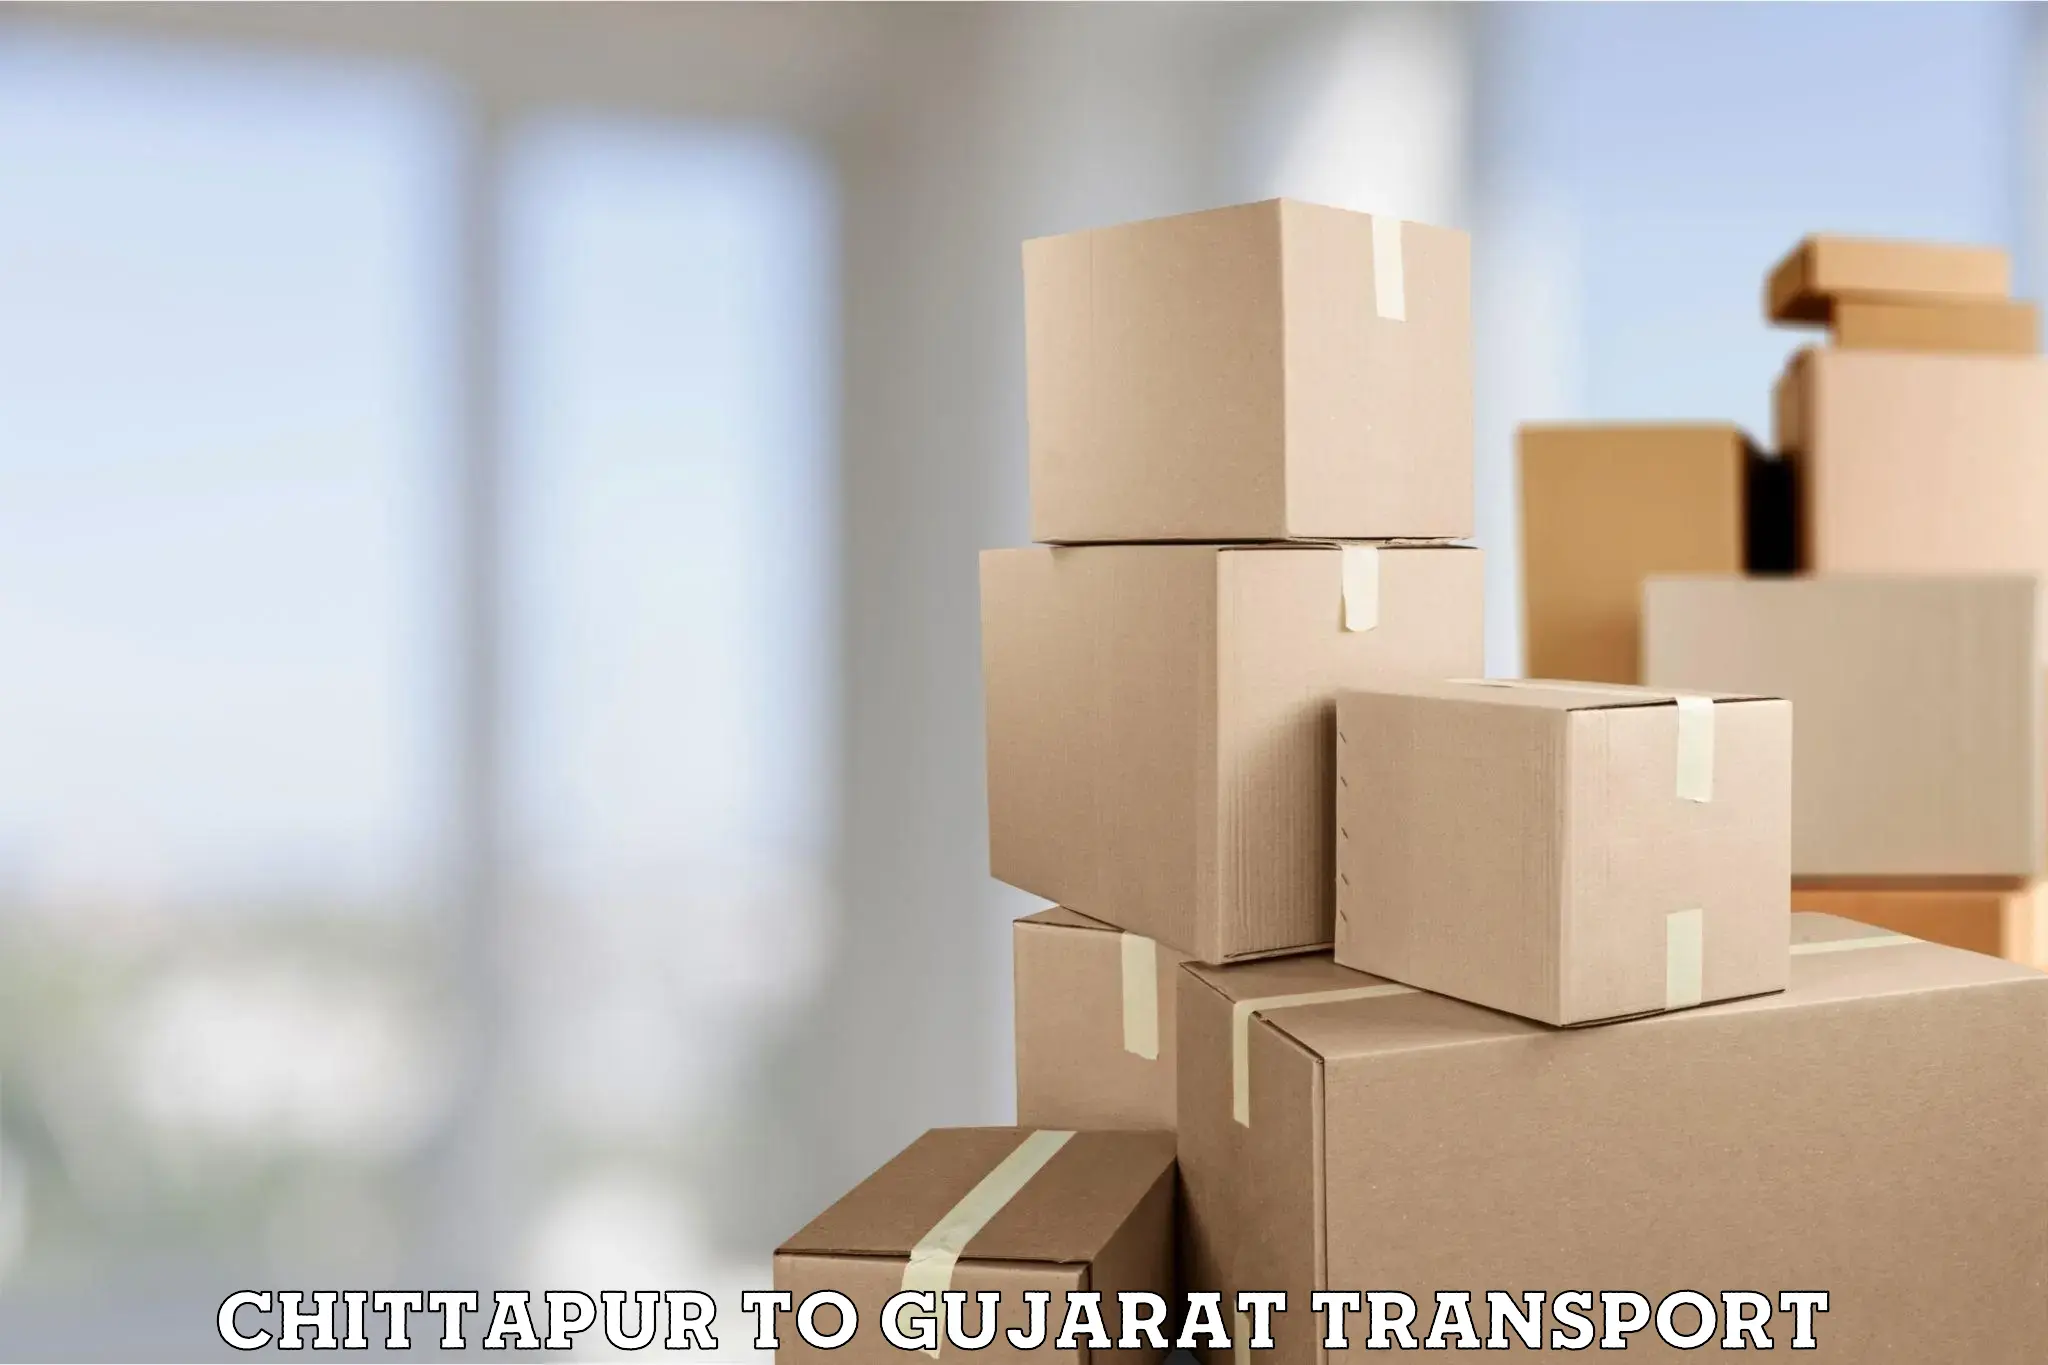 Delivery service Chittapur to Tarapur